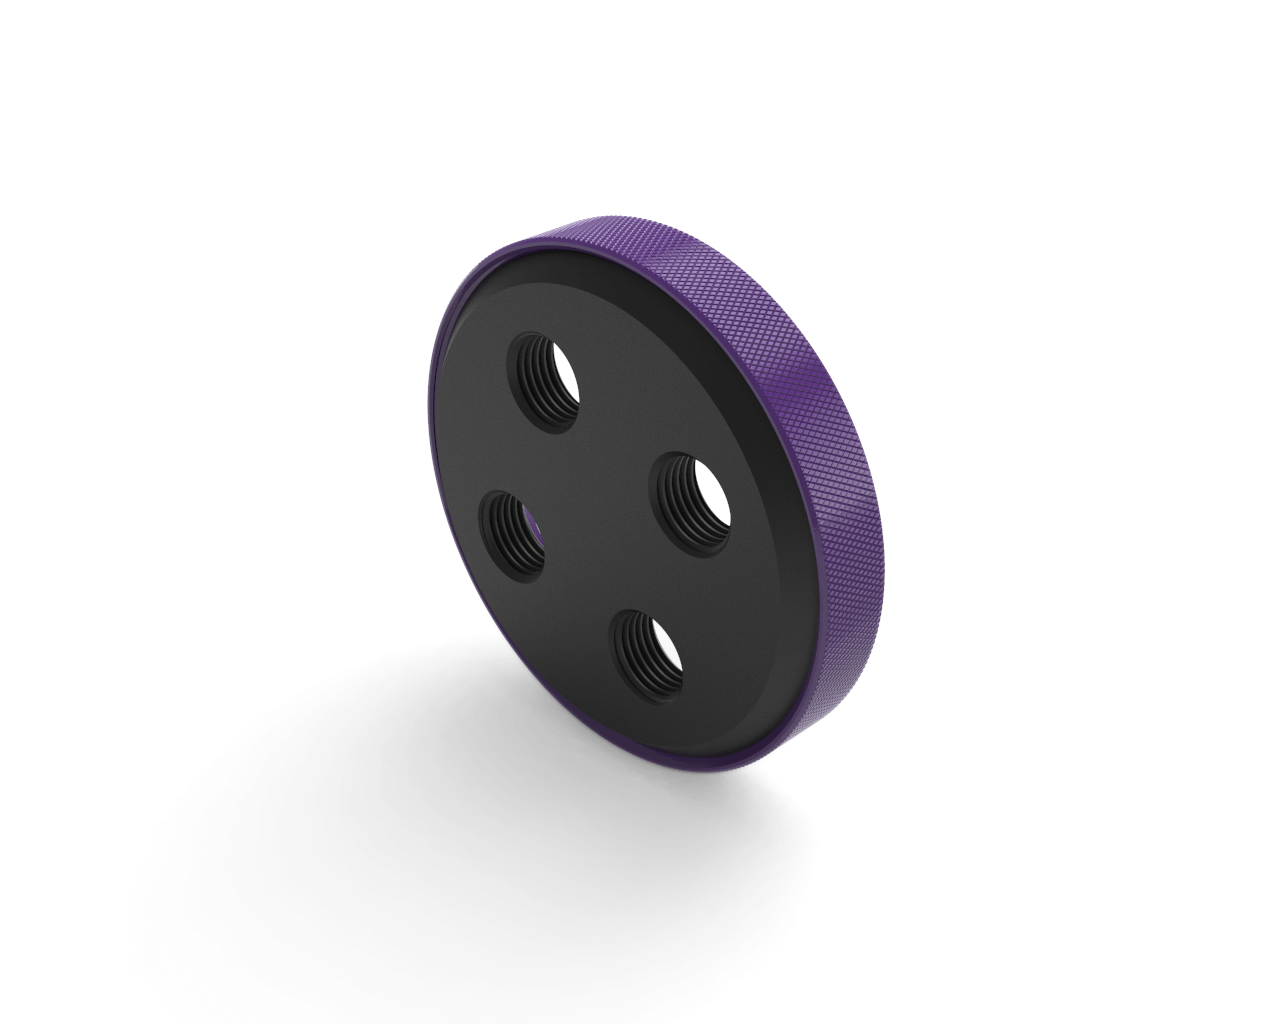 PrimoChill CTR Replacement SX Compression Ring - PrimoChill - KEEPING IT COOL Purple